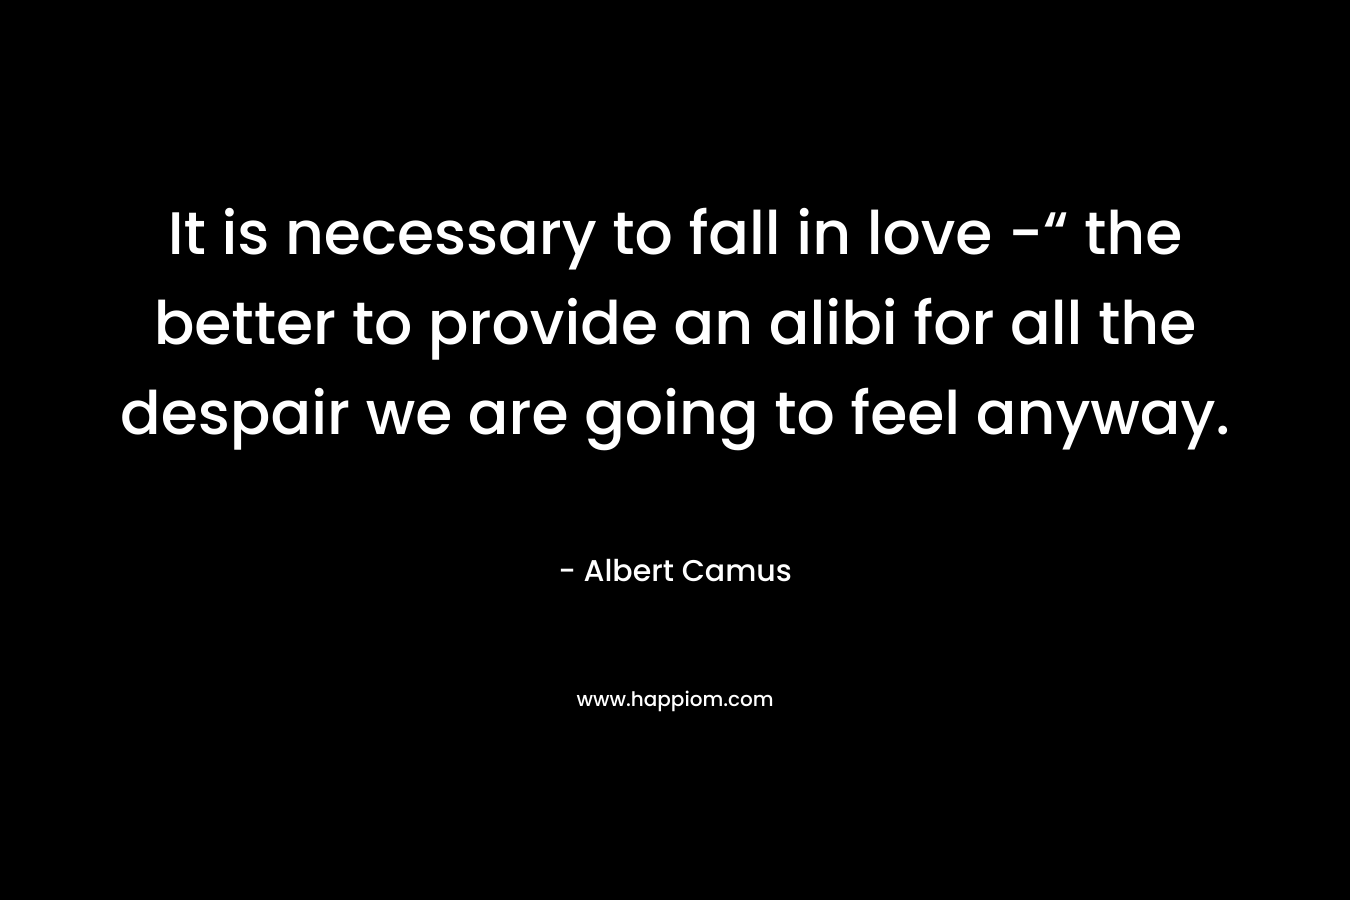 It is necessary to fall in love -“ the better to provide an alibi for all the despair we are going to feel anyway. – Albert Camus